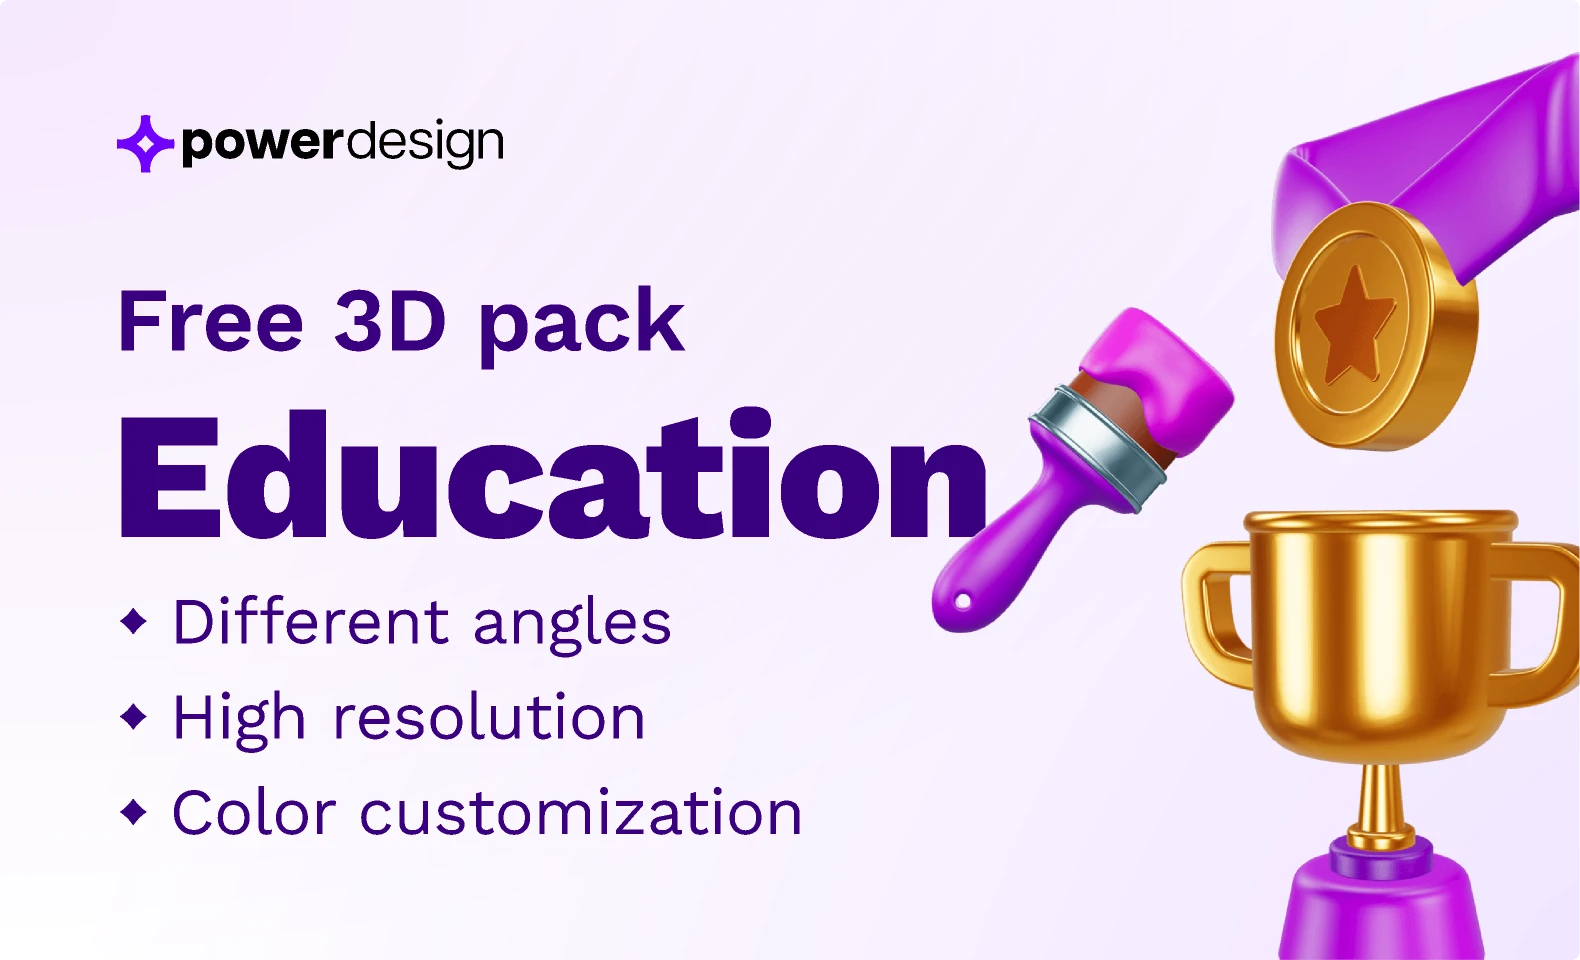 Education - Free 3D pack for Figma and Adobe XD